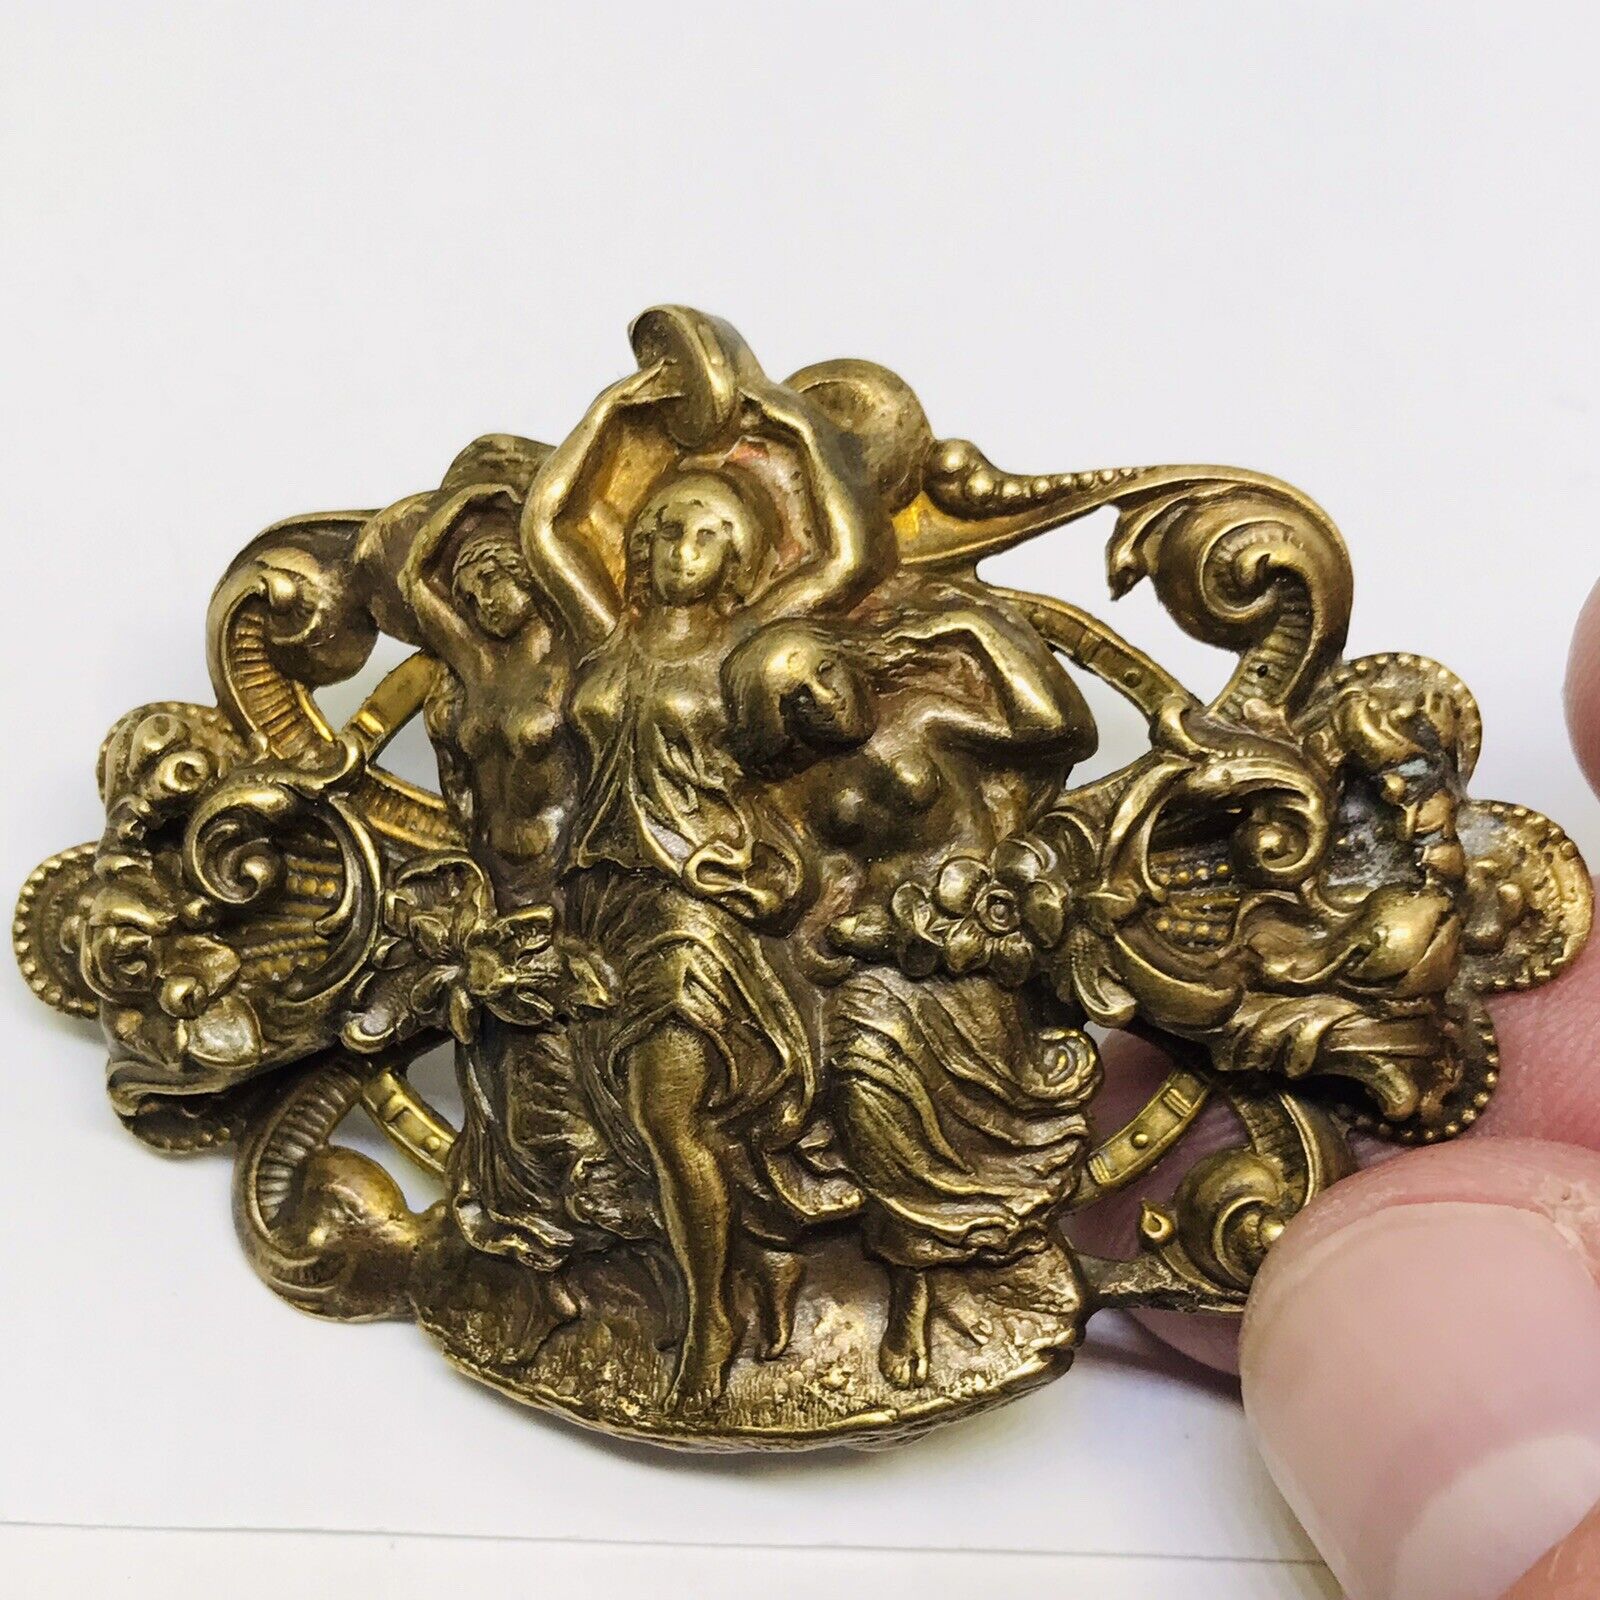 ANTIQUE 3 GRACES PIN BROOCH 3” OPEN WORK VERY DETAILED EARLY CENTURY